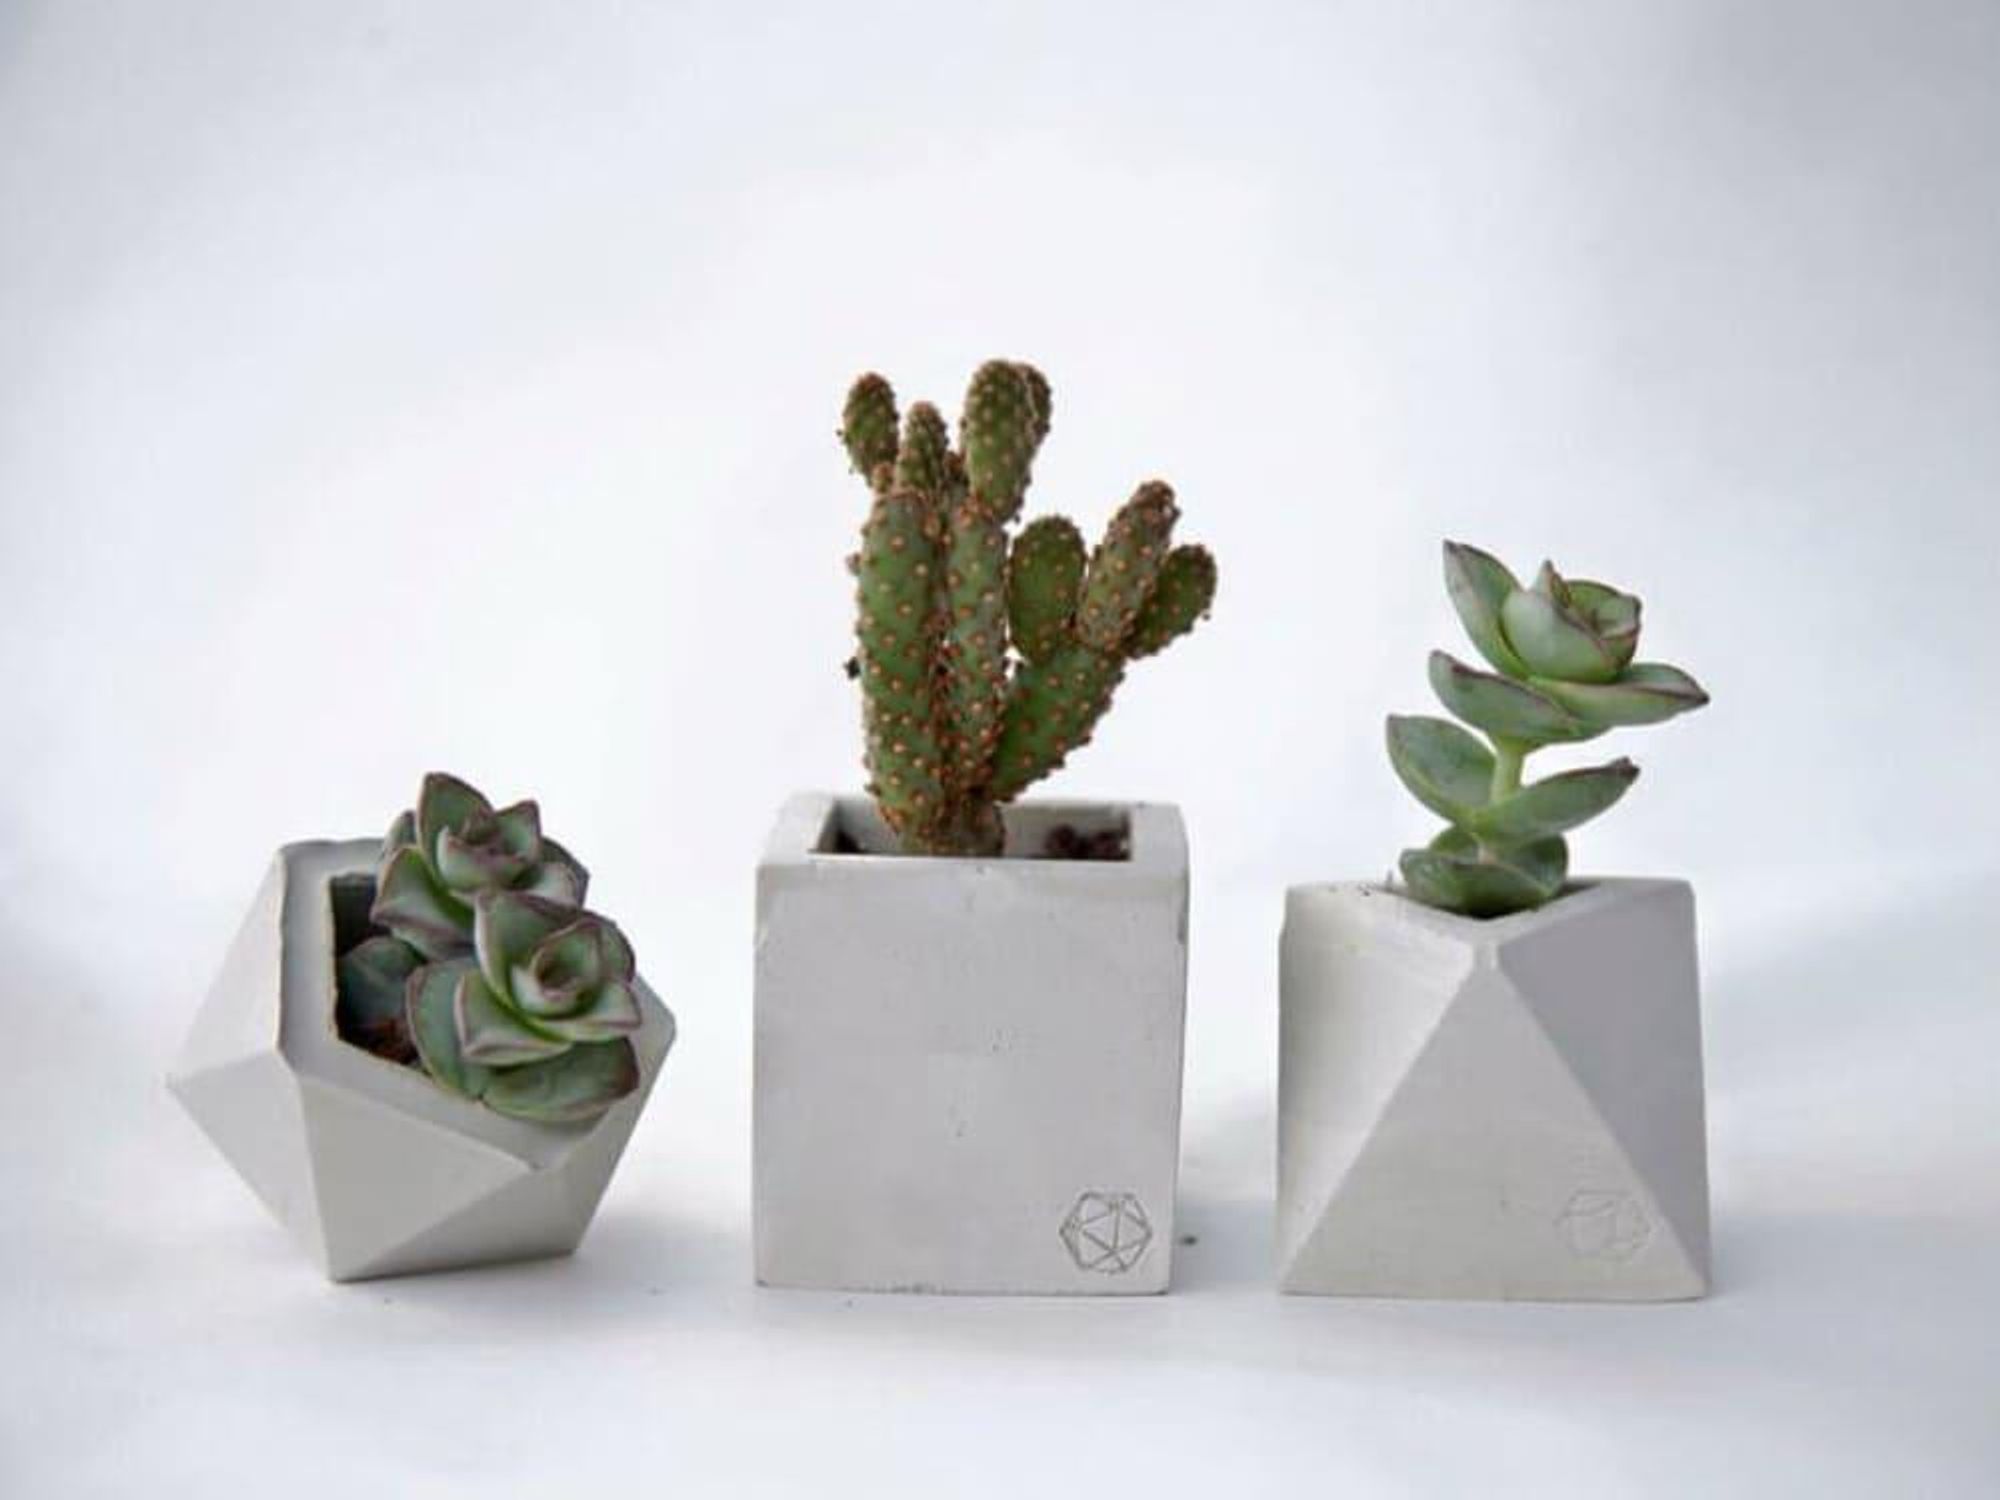 Planters from Concrete Geometric at Birchwood